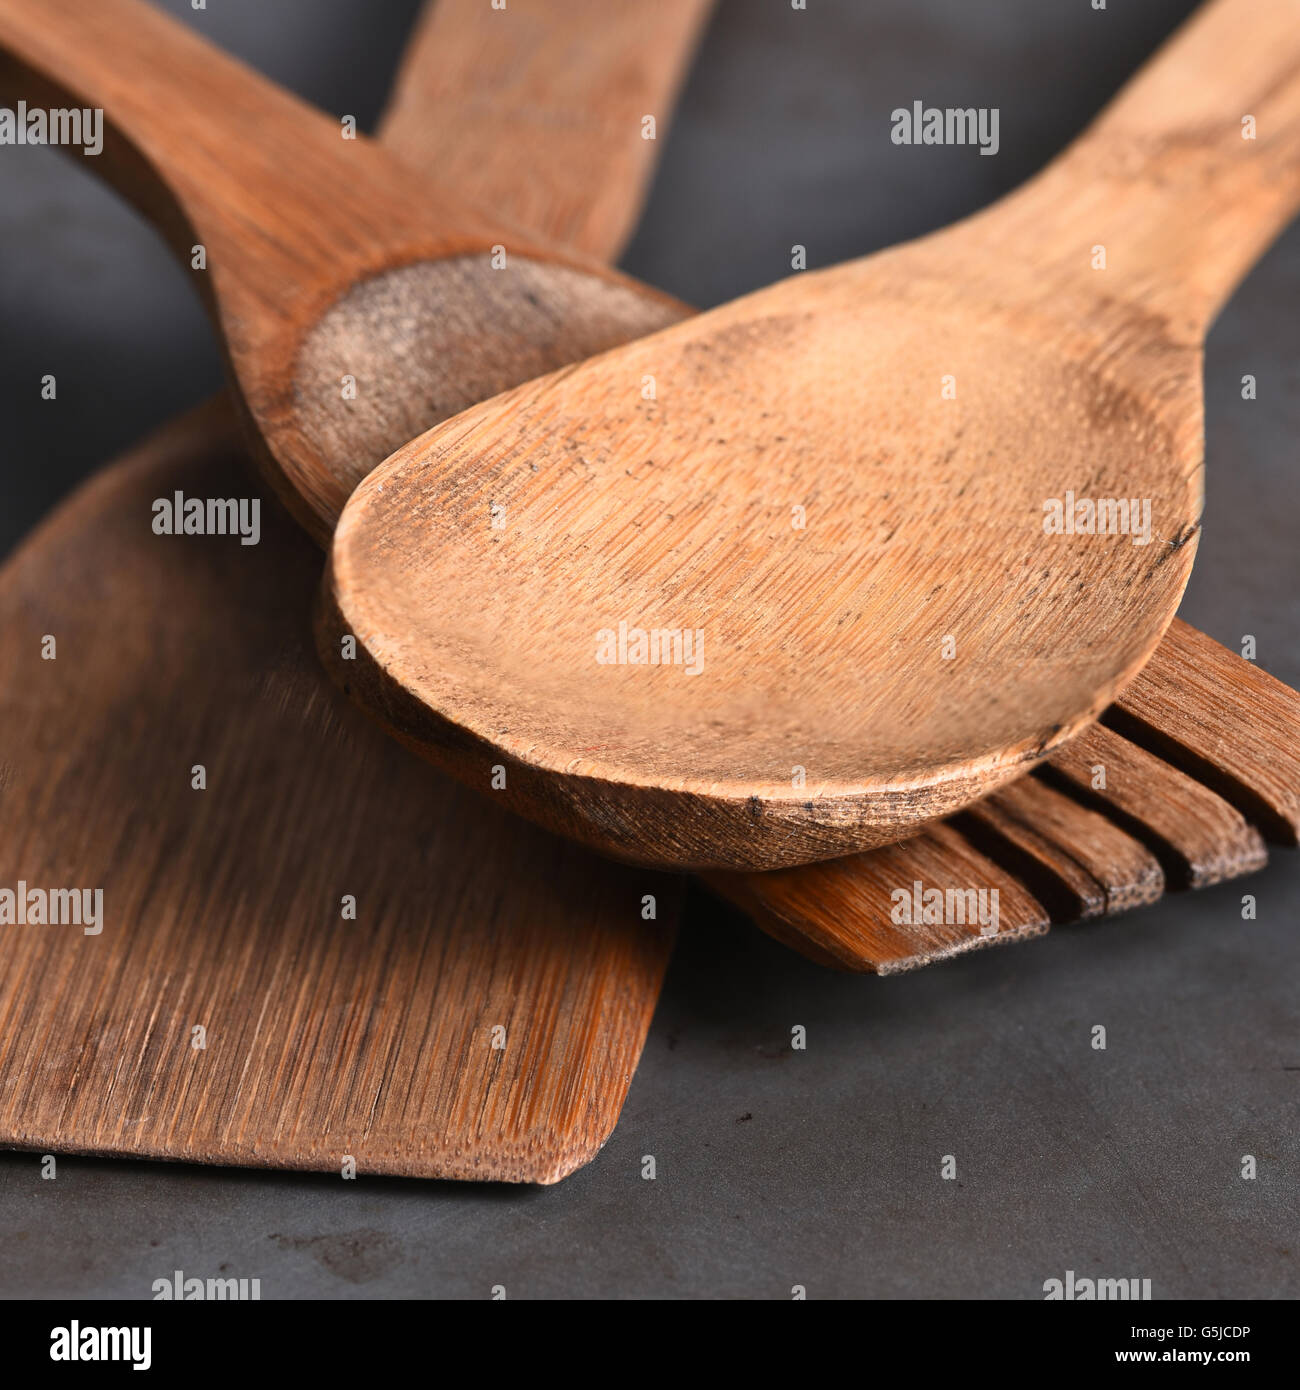 Closeup of a group of wood kitchen utensils. Stock Photo